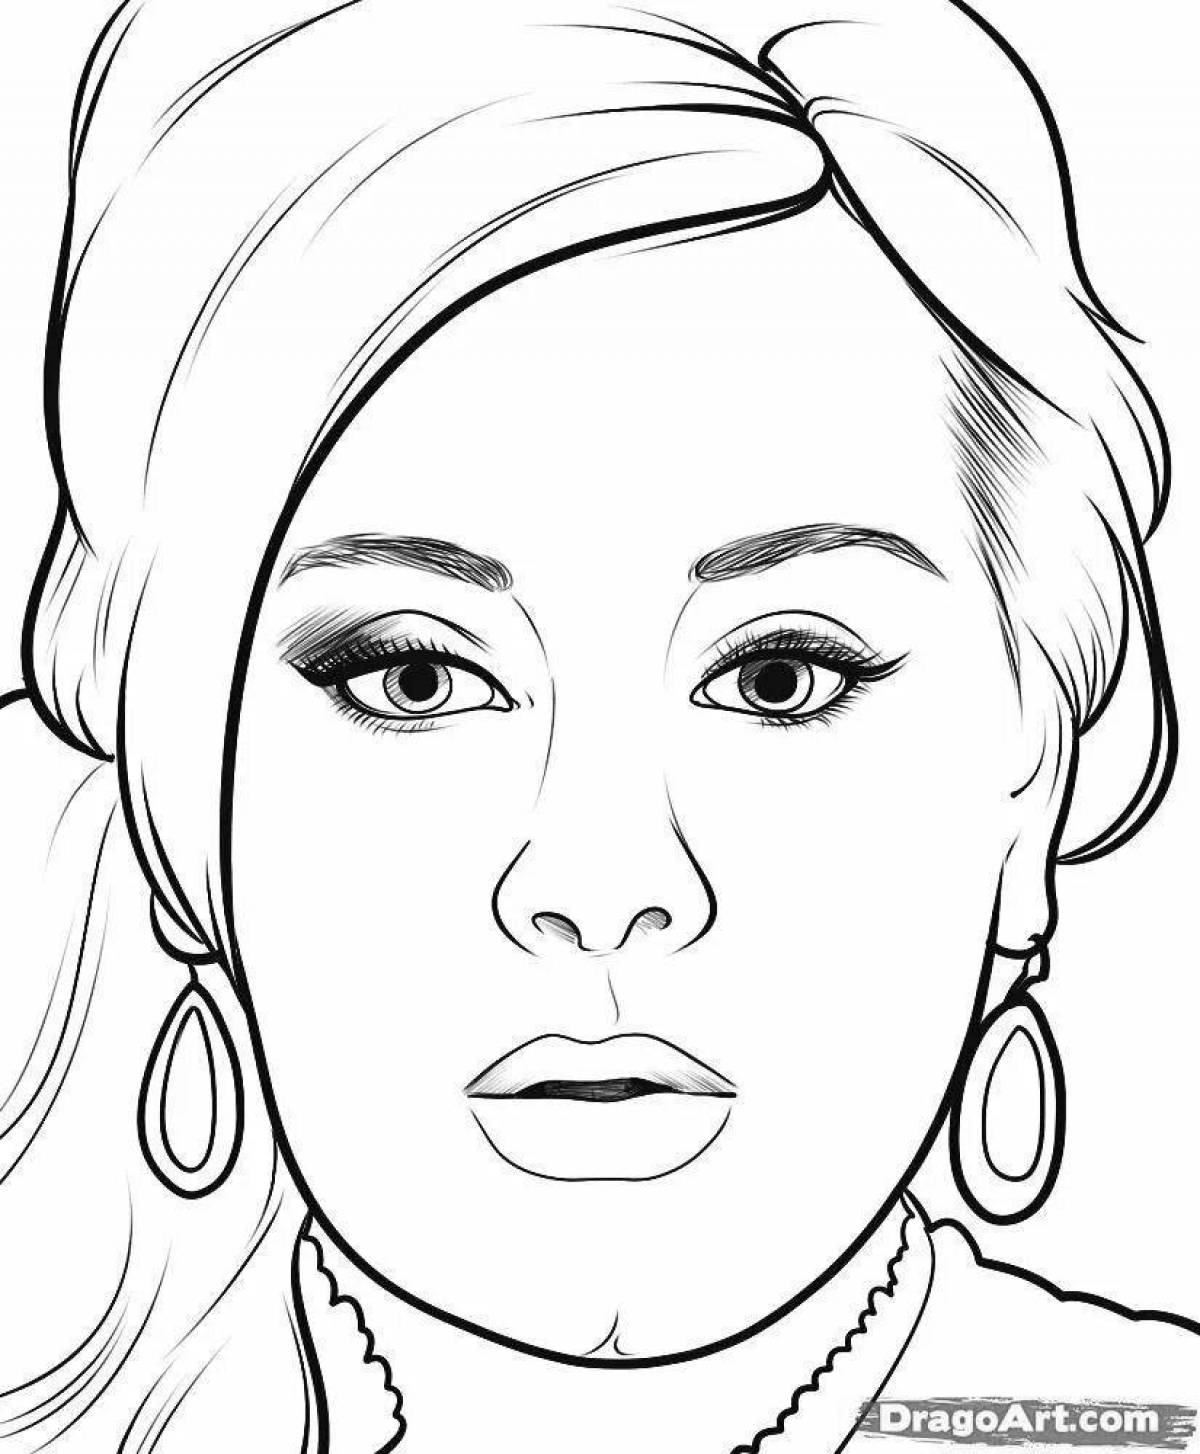 Animated face coloring page